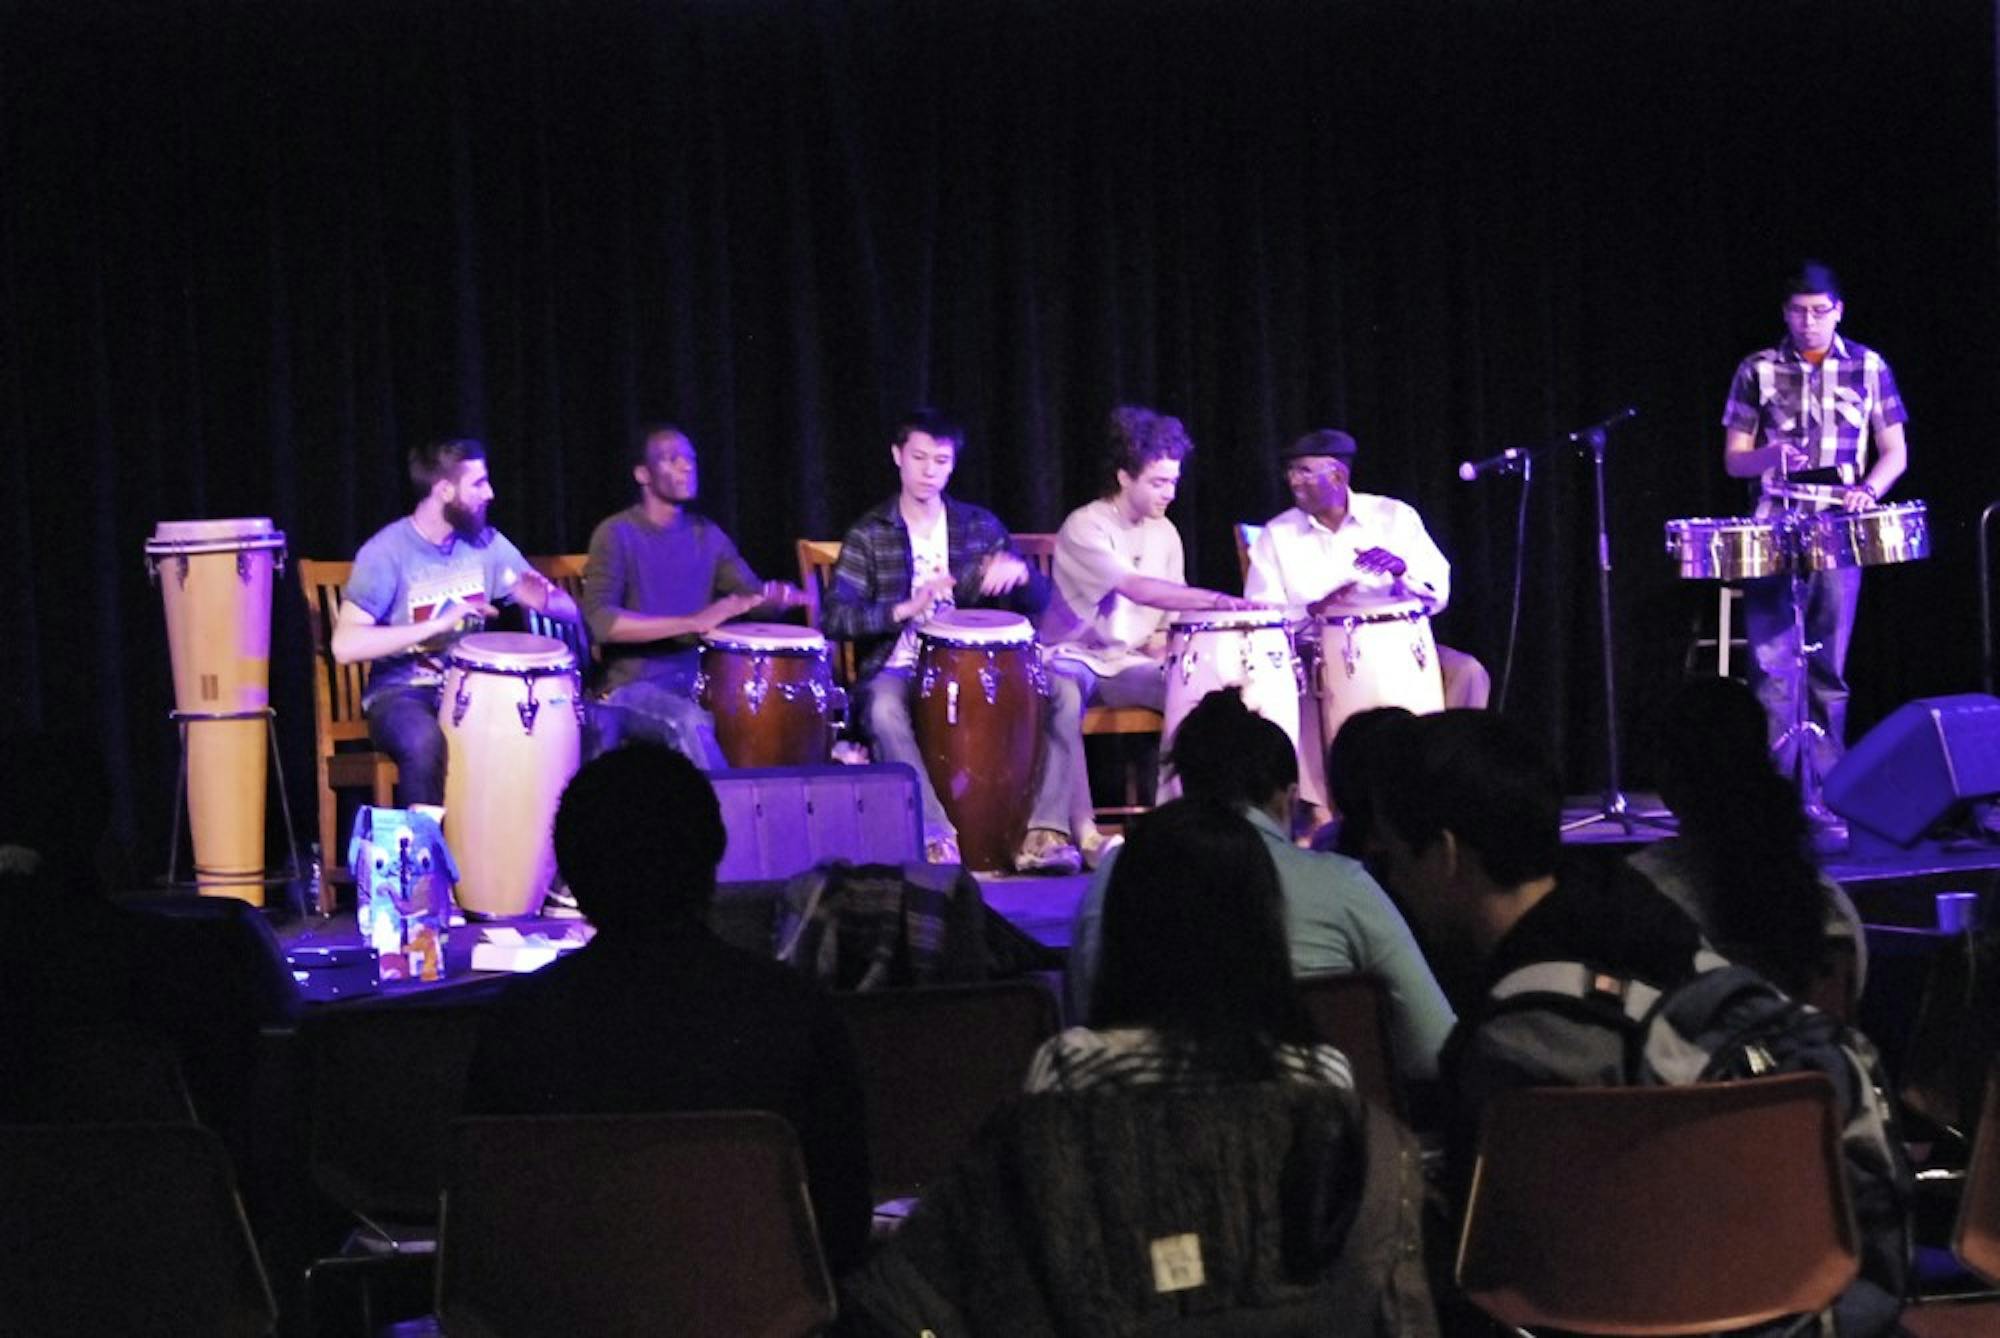 Dartmouth musicians welcomed the Nile Project at “Sing Africa!”